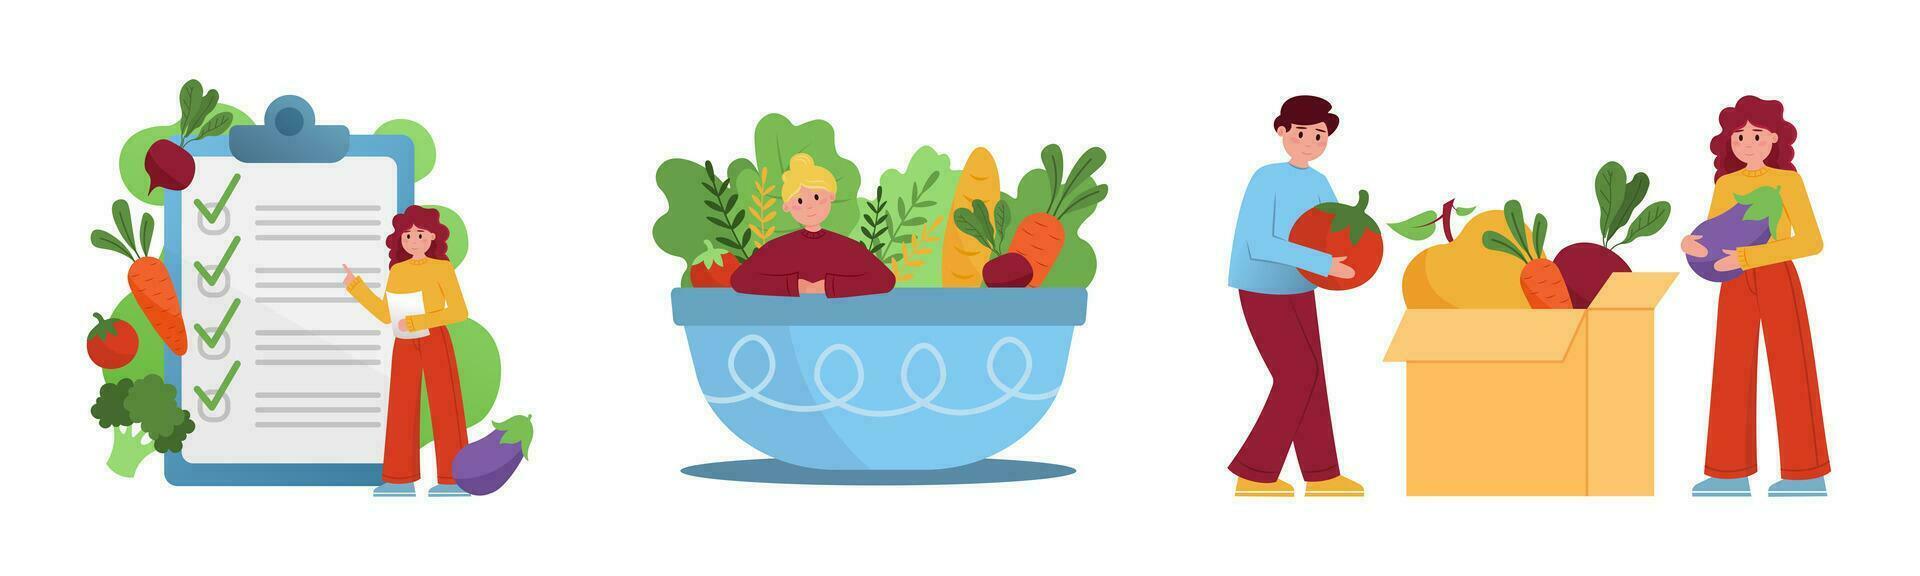 Set of cartoon characters of young people eating healthy food vector